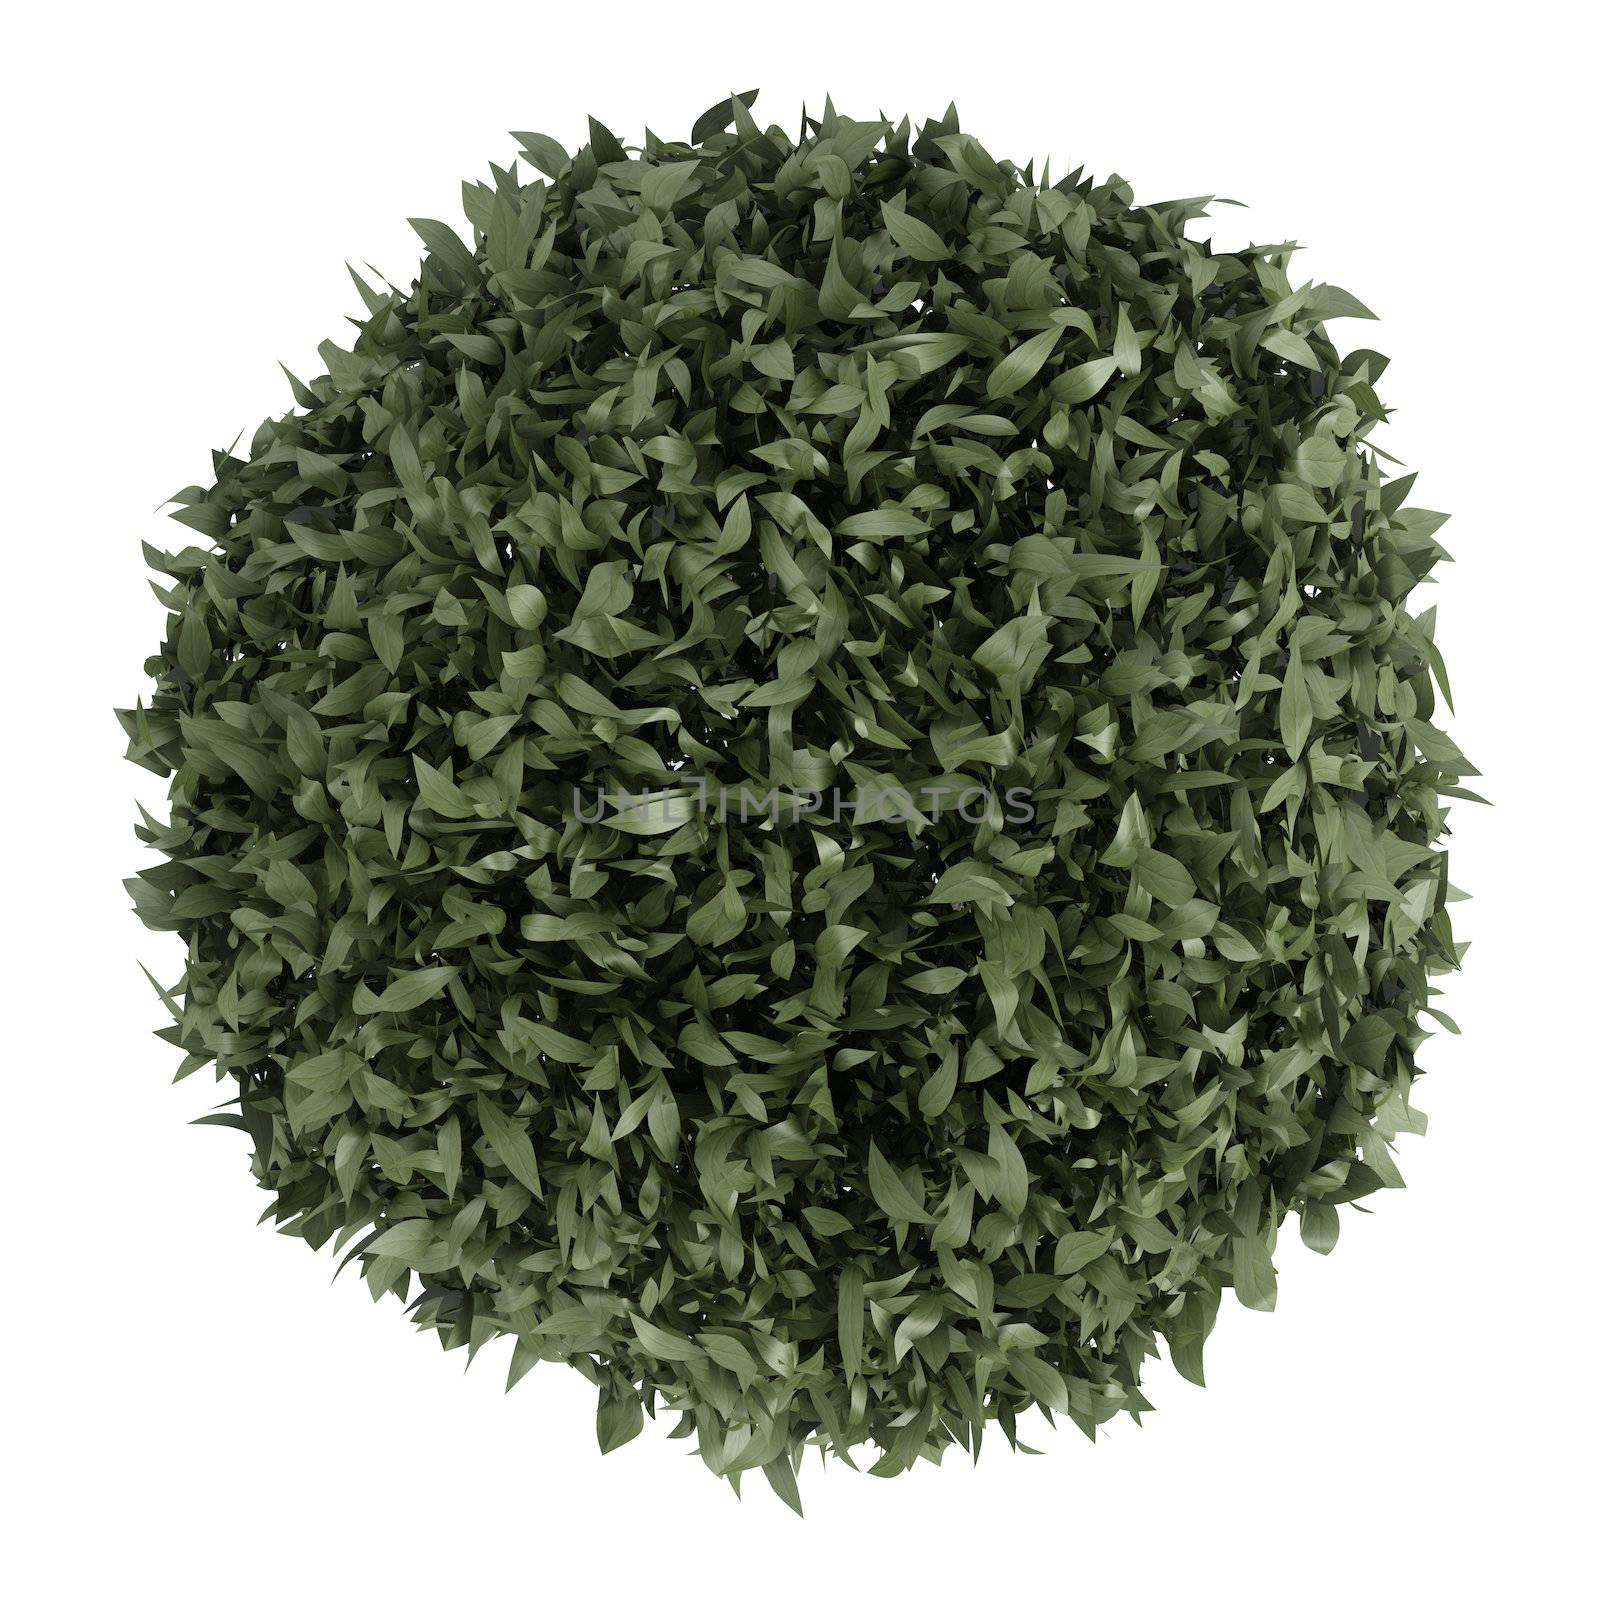 Myrtus, or myrtle, topiary tree carefully trimmed into a spherical crown in a container for use outdoors as a decorative garden element or indoors as a houseplant isolated on white